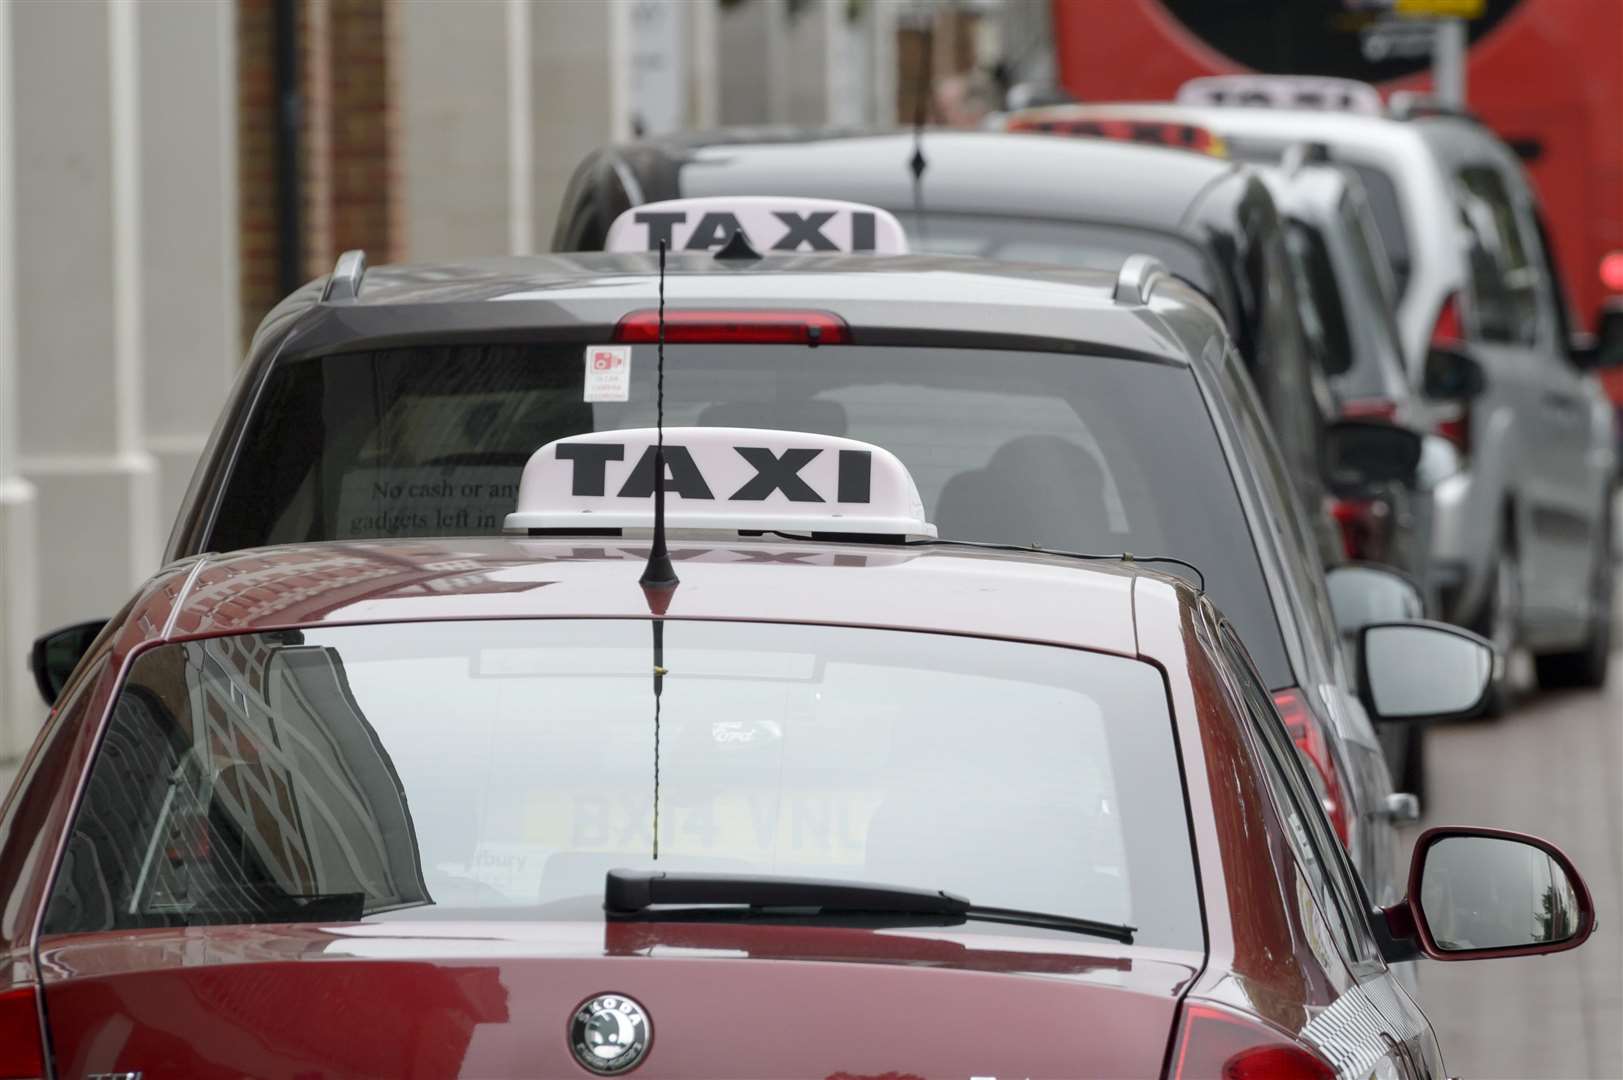 Taxi drivers in Gravesend were targeted by Bushell. Stock image